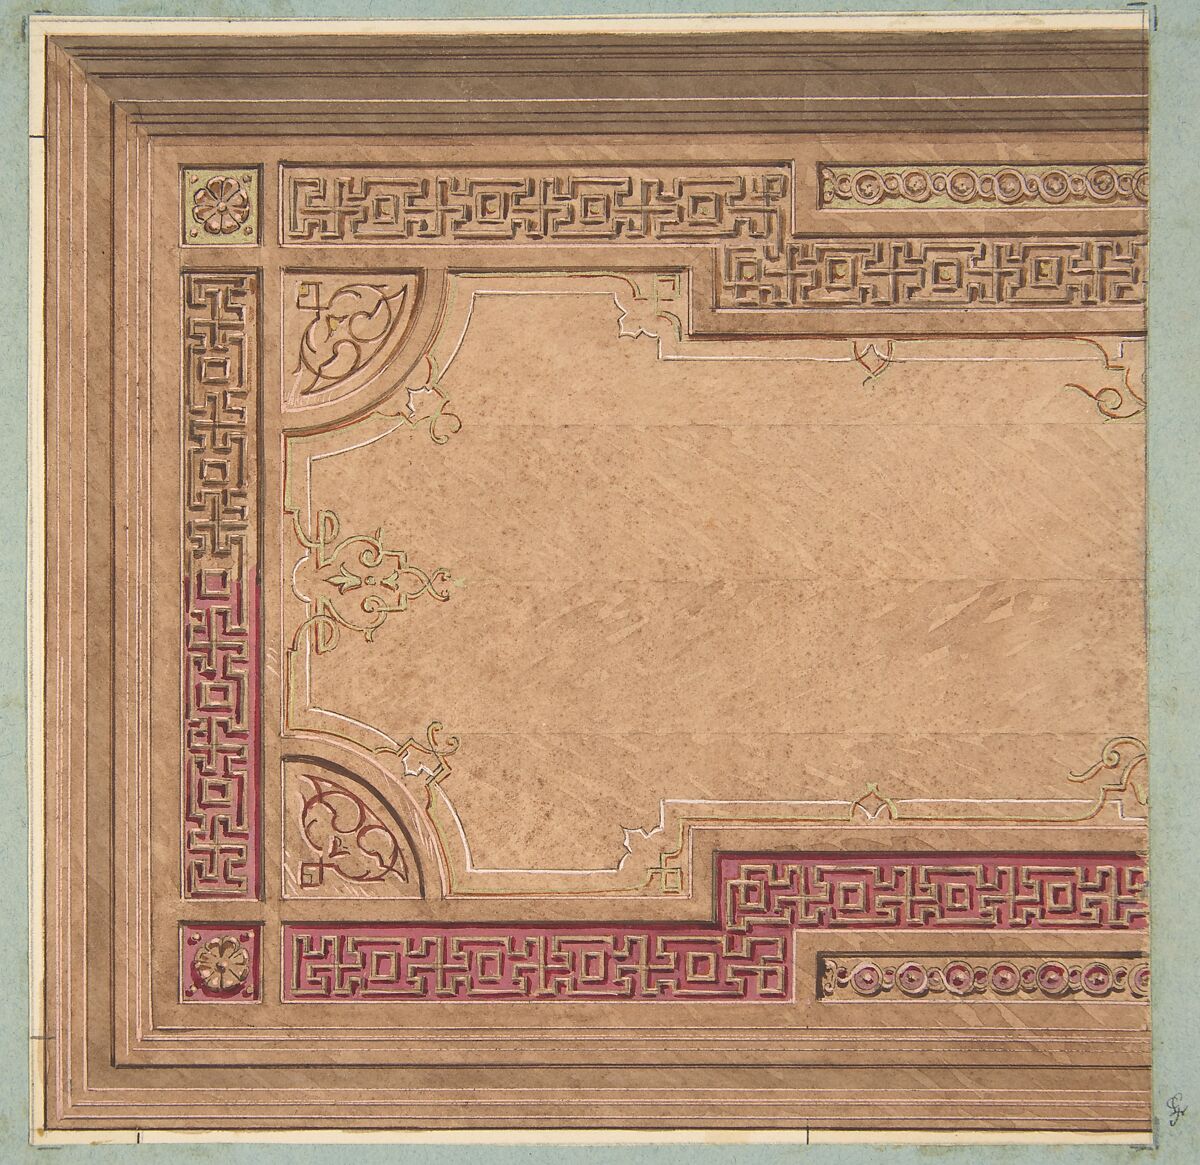 Partial Design for the decoration of a ceiling, Jules-Edmond-Charles Lachaise (French, died 1897), graphite and watercolor on wove paper; inlaid in blue wove paper 